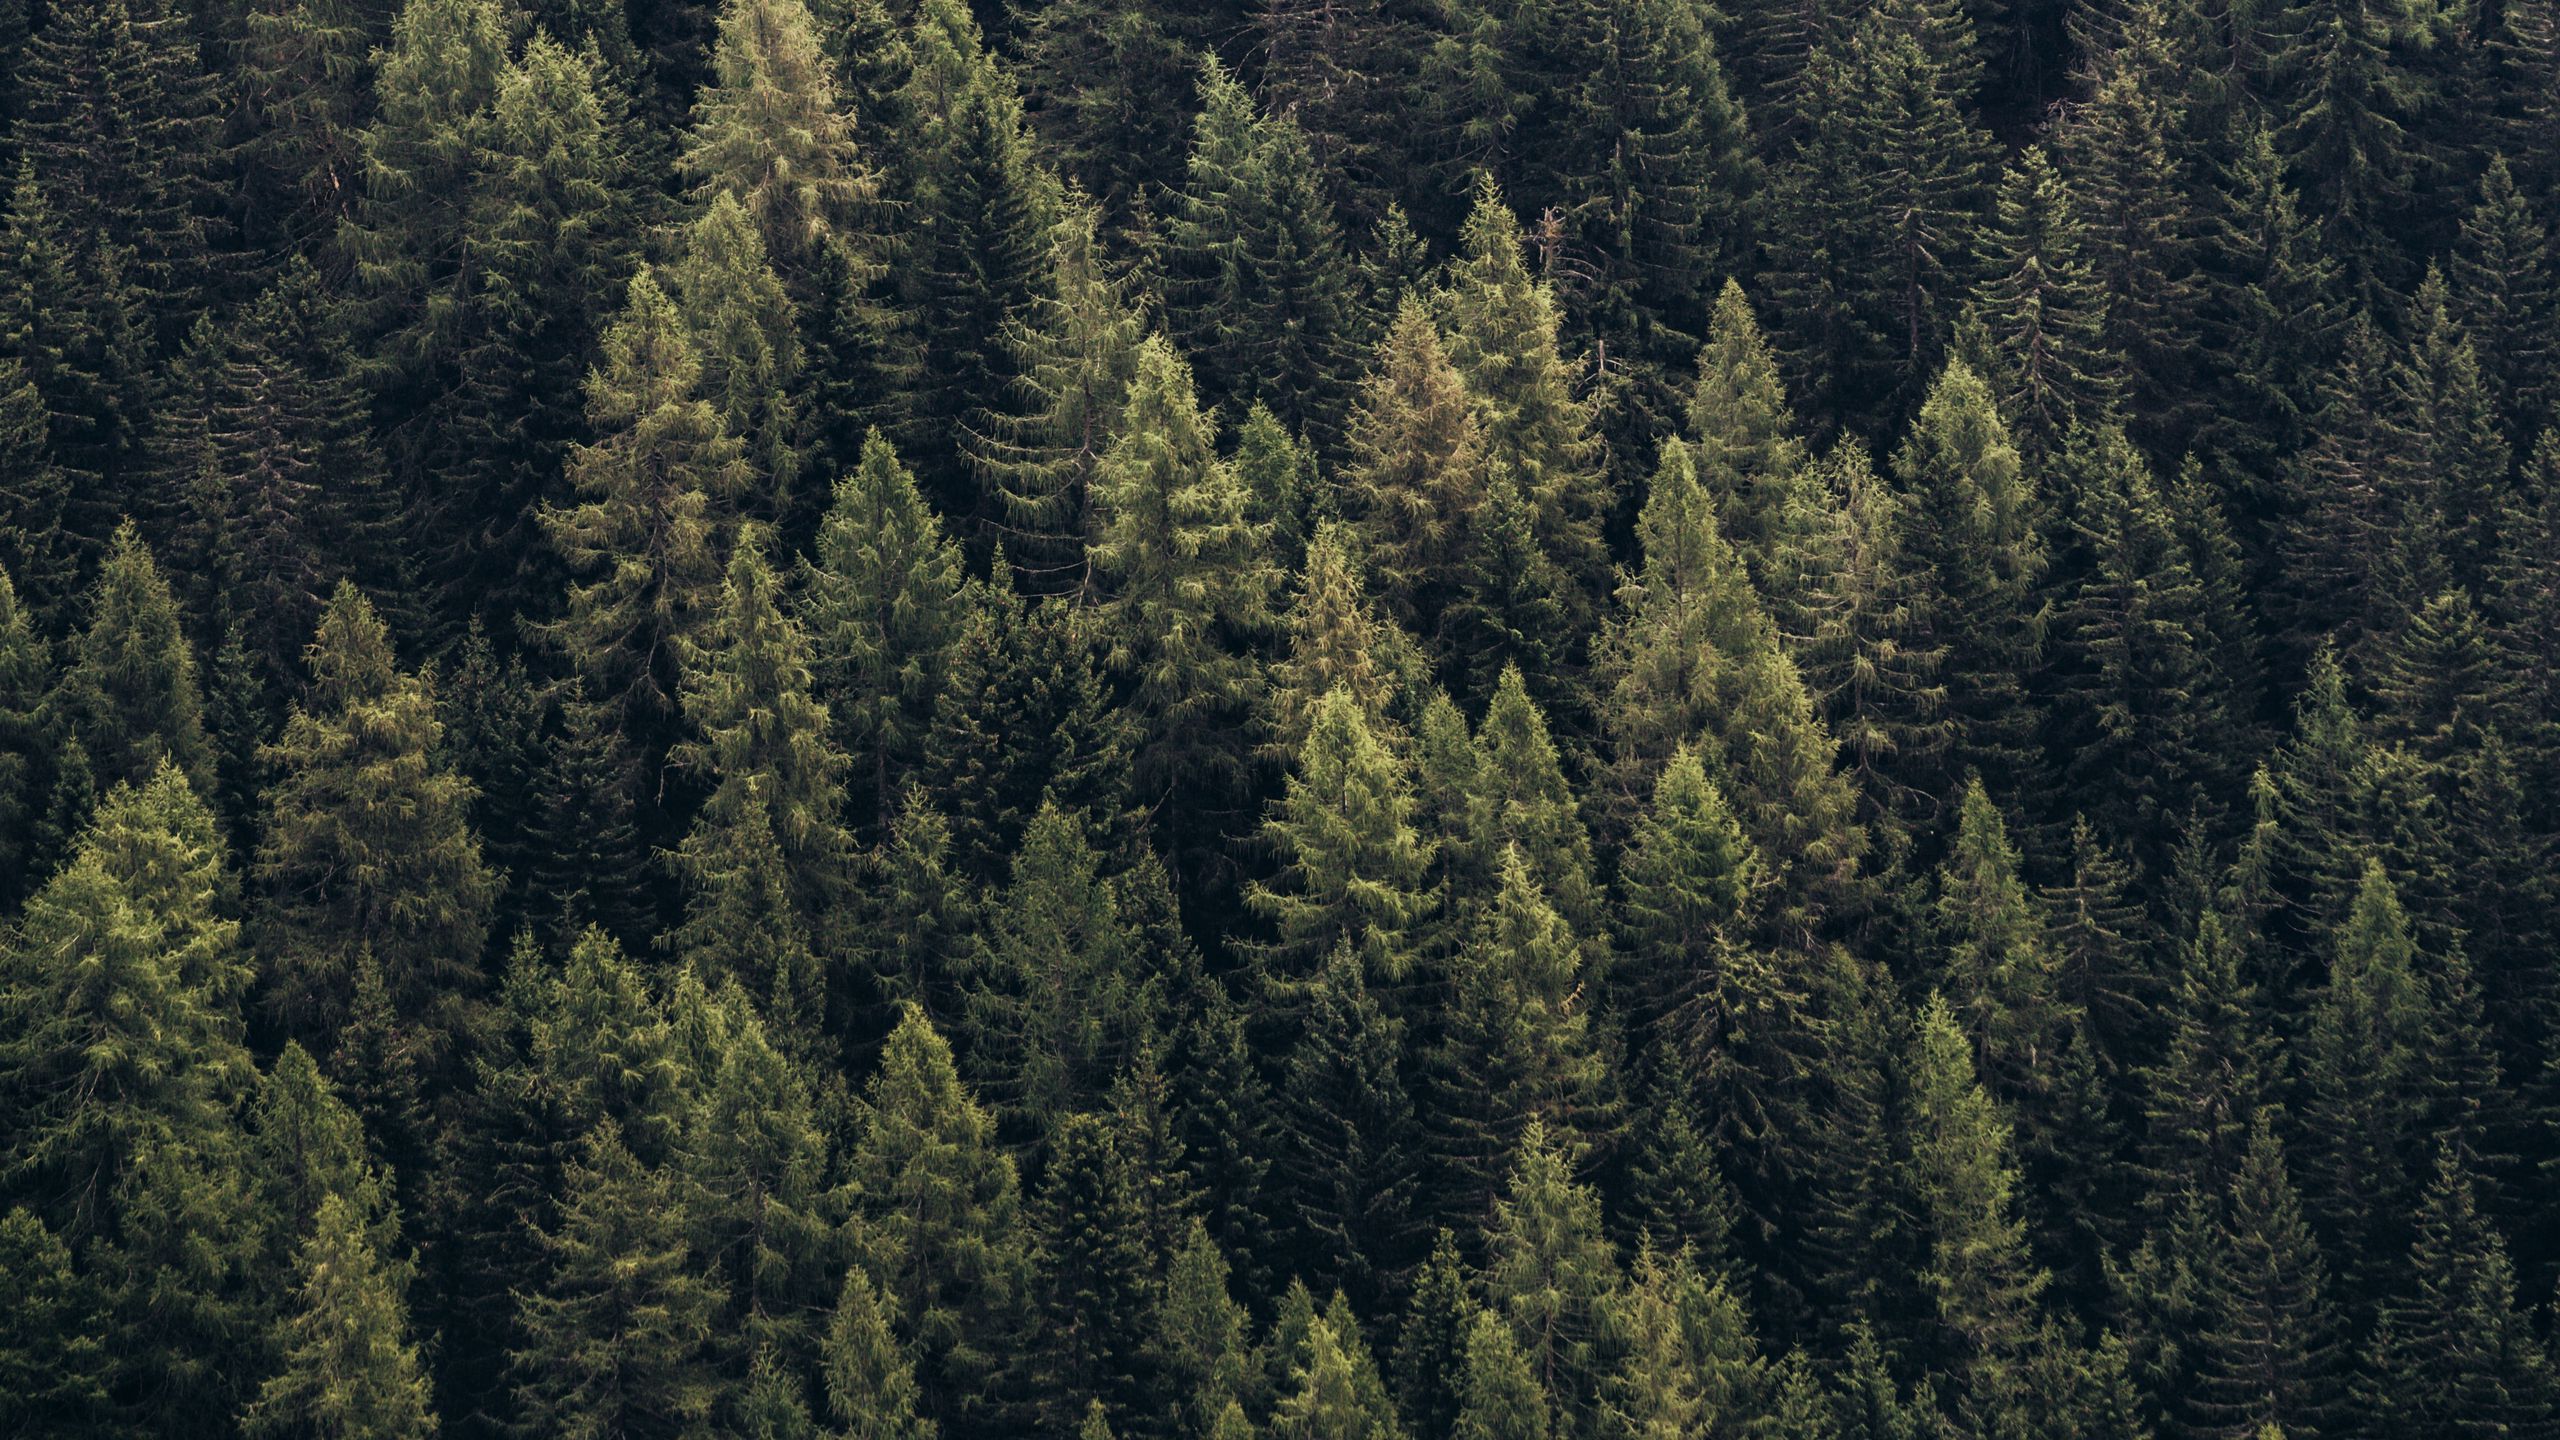 Download wallpaper 2560x1440 forest, trees, aerial view, needles, pines ...